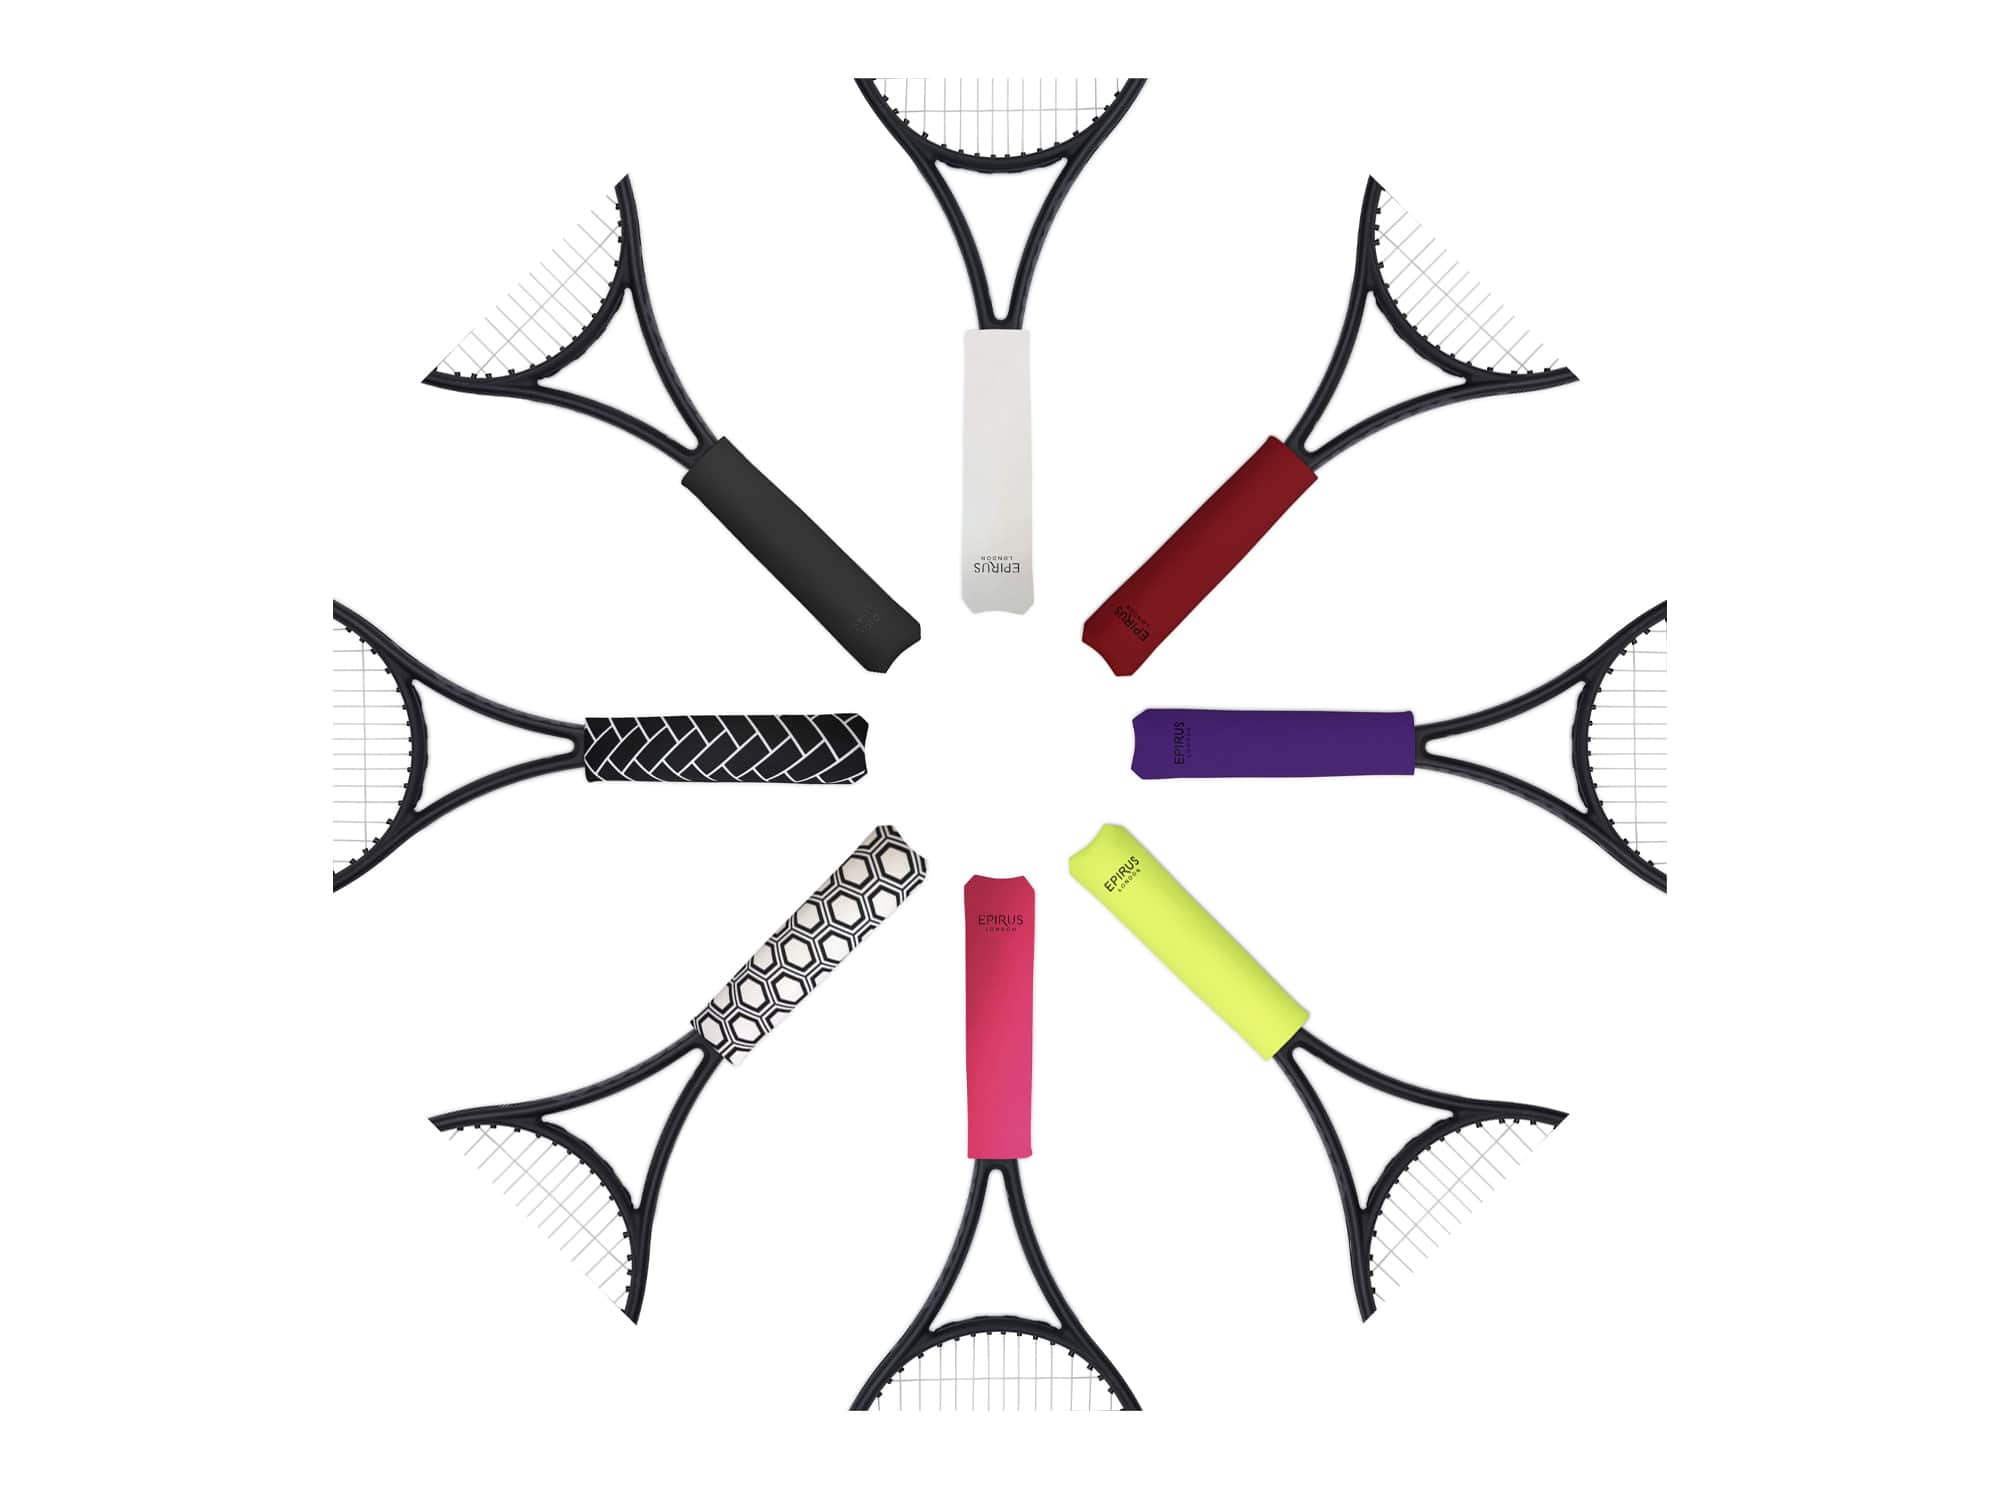 Epirus Neoprene Grip Covers for Tennis Rackets - All Colour Options